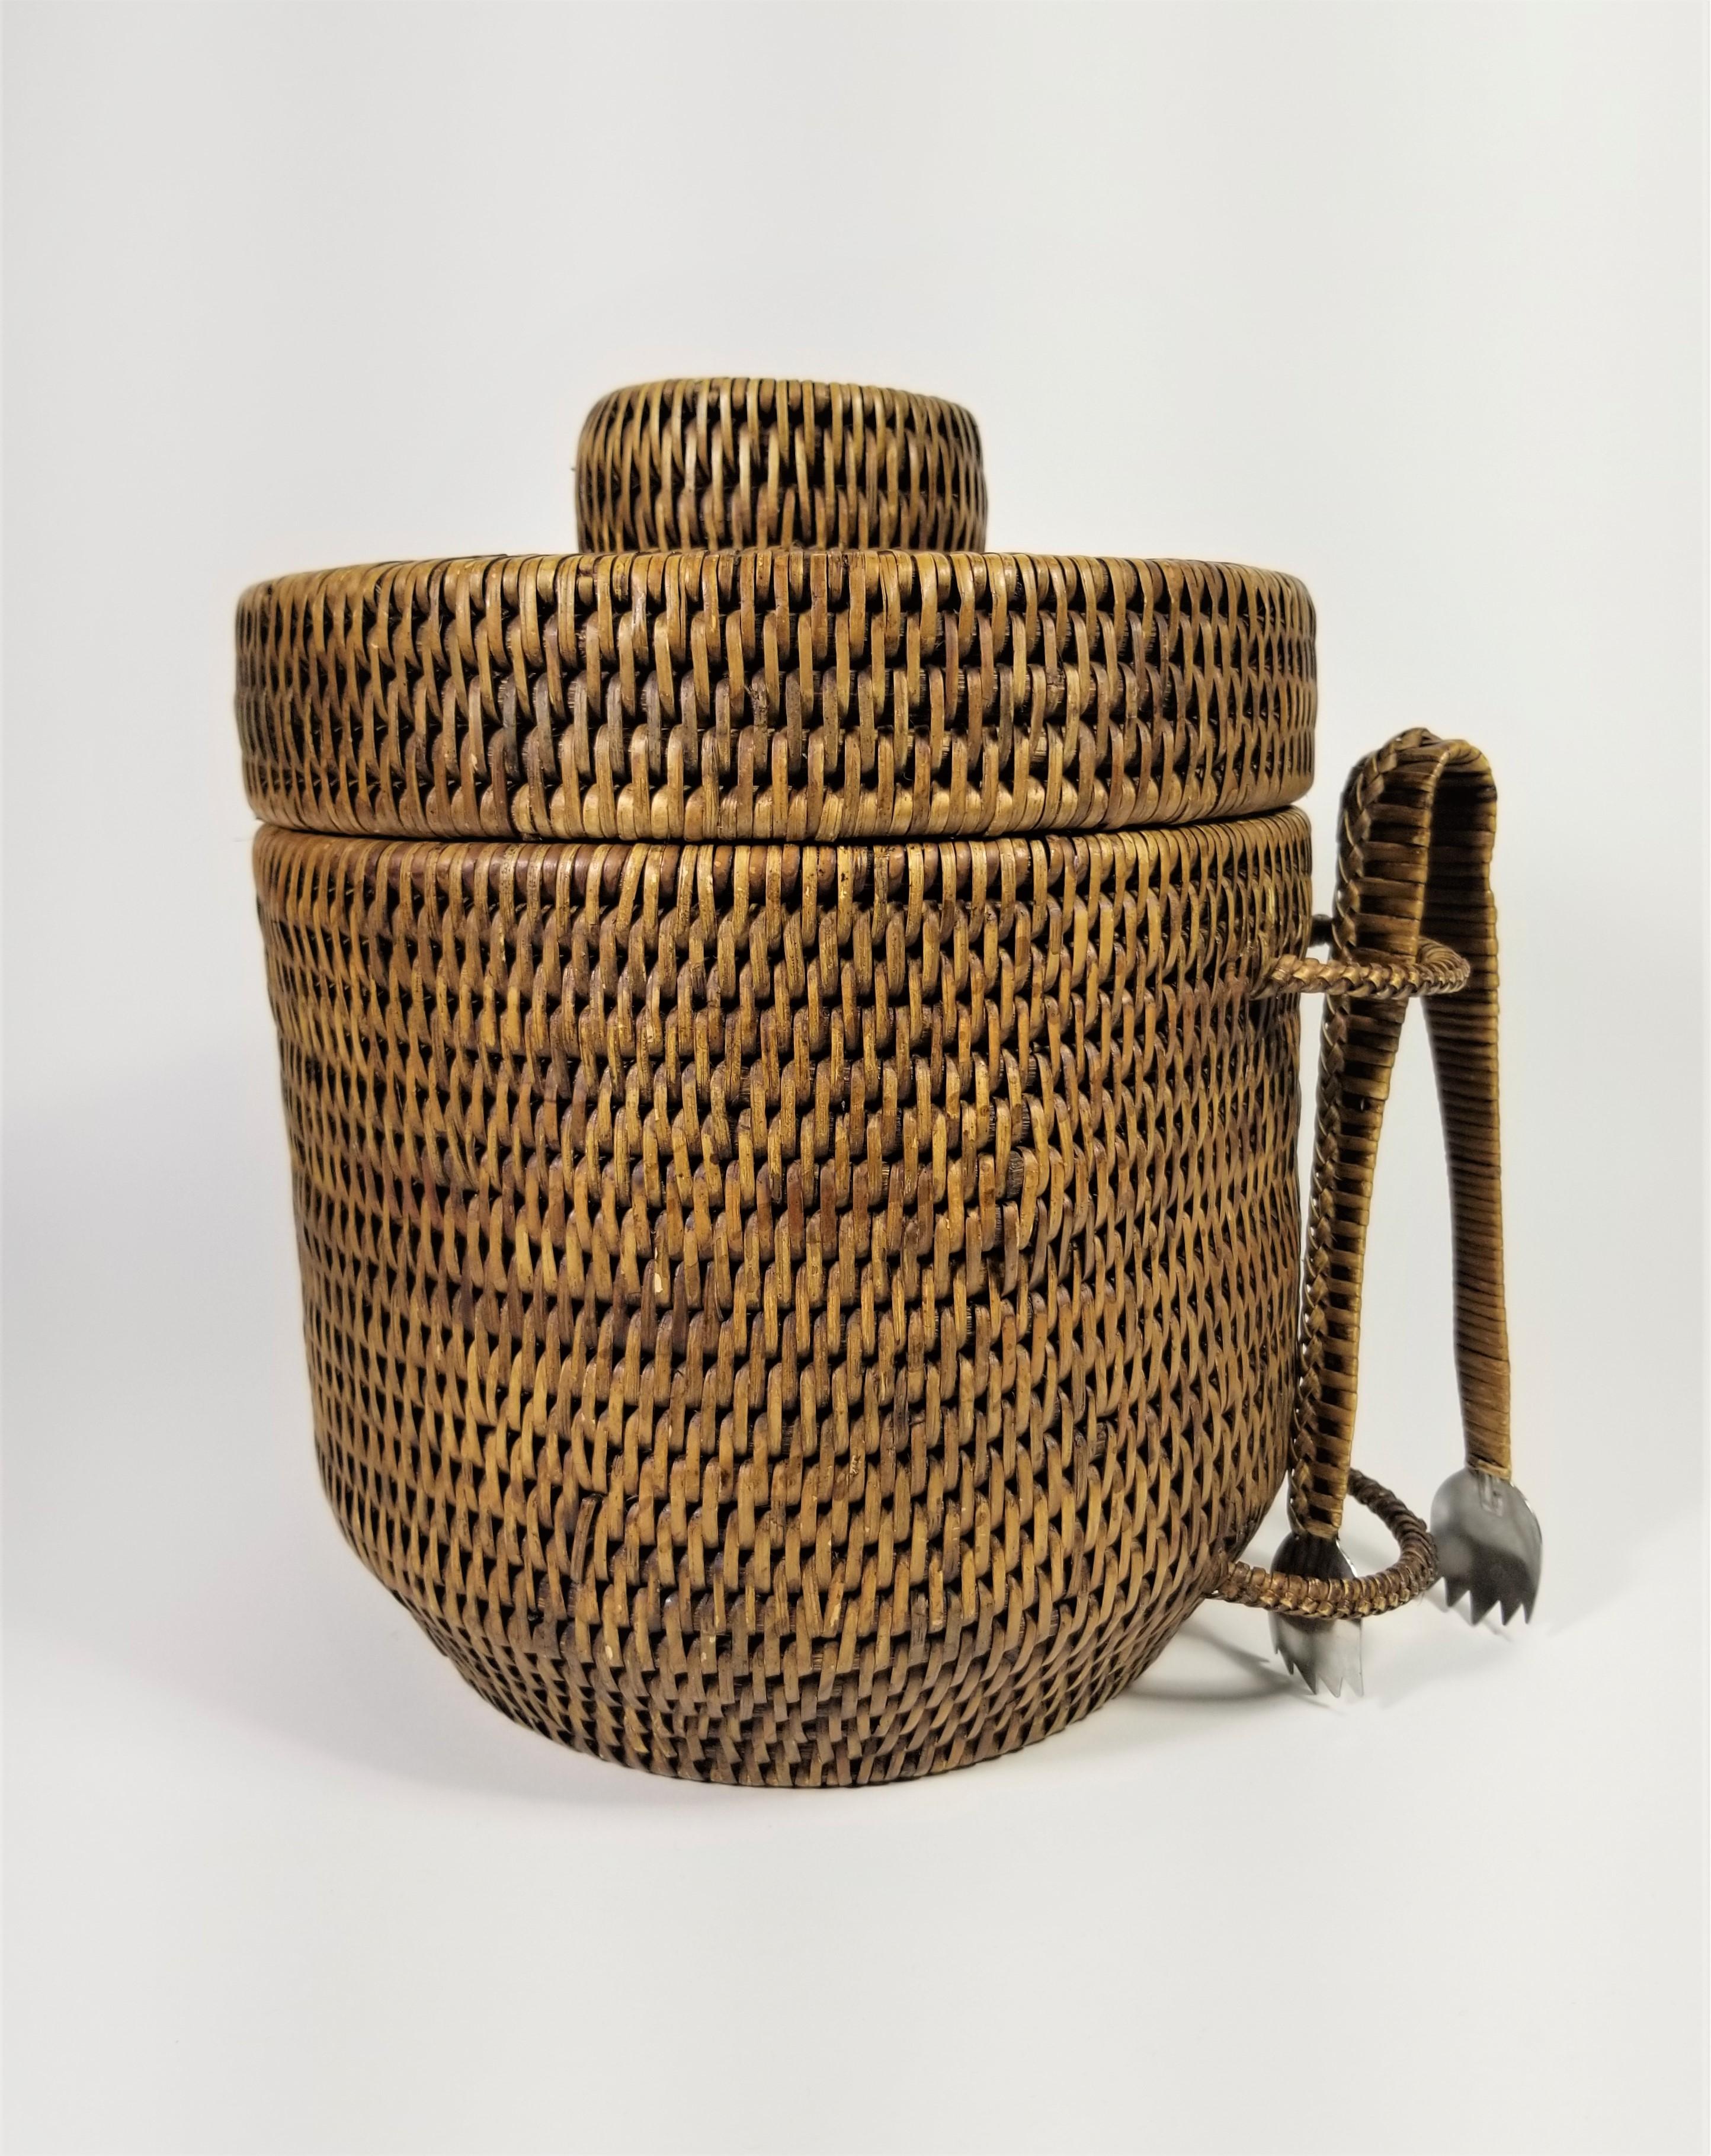 Vintage Rattan Wicker Lidded Ice Bucket with Tongs.
Excellent Condition.